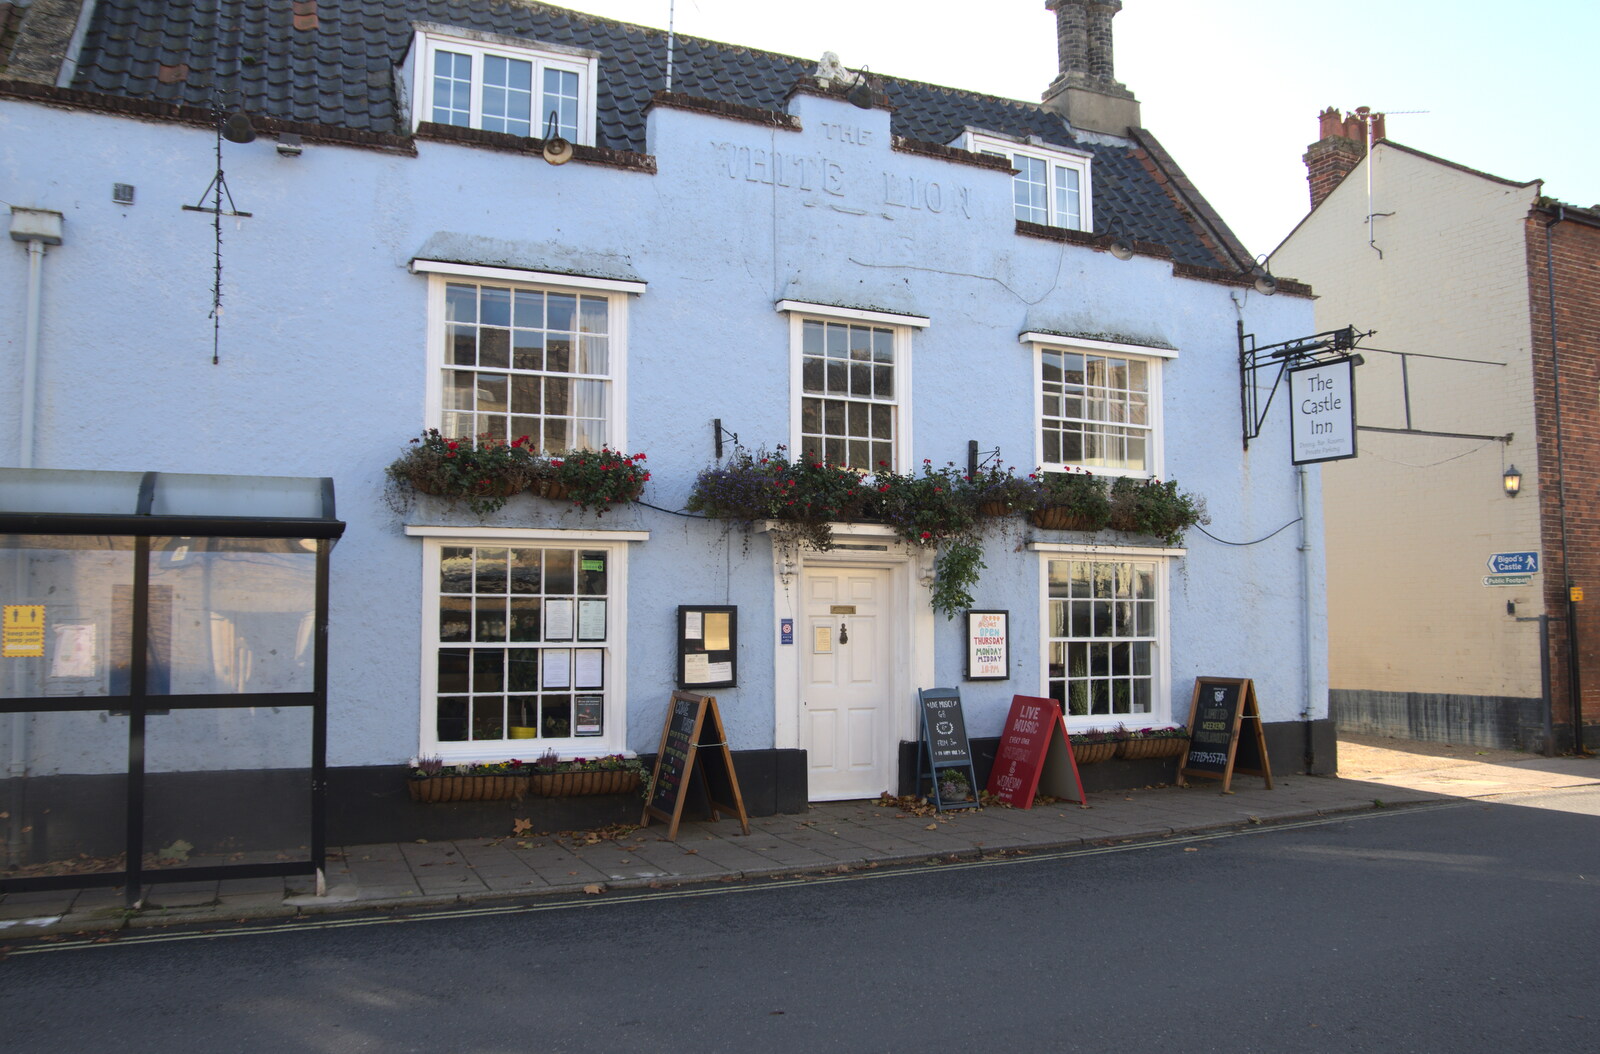 A Postcard from Bungay, Suffolk - 2nd November 2022: A pub with a dual identity